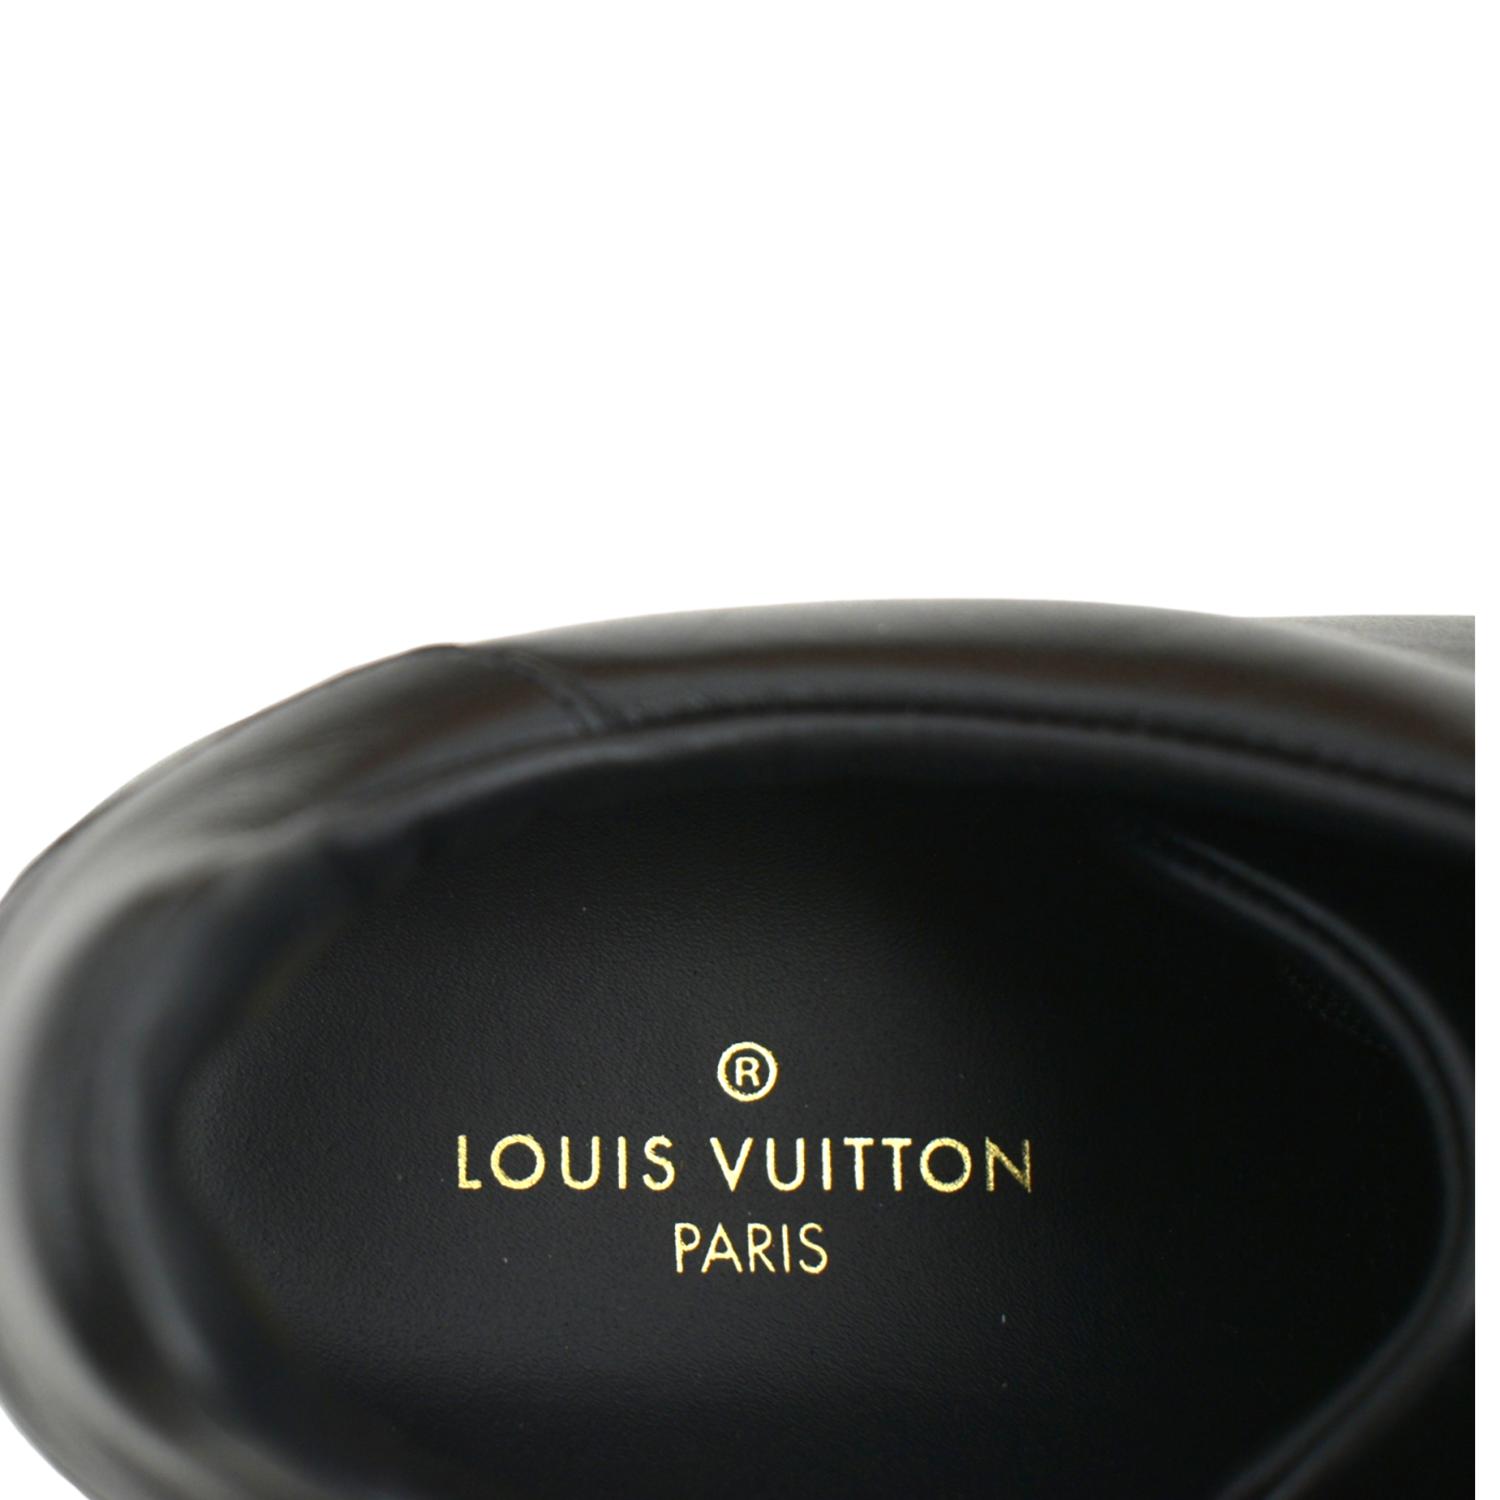 Louis Vuitton Time Out Sneaker Gold. Size 37.0